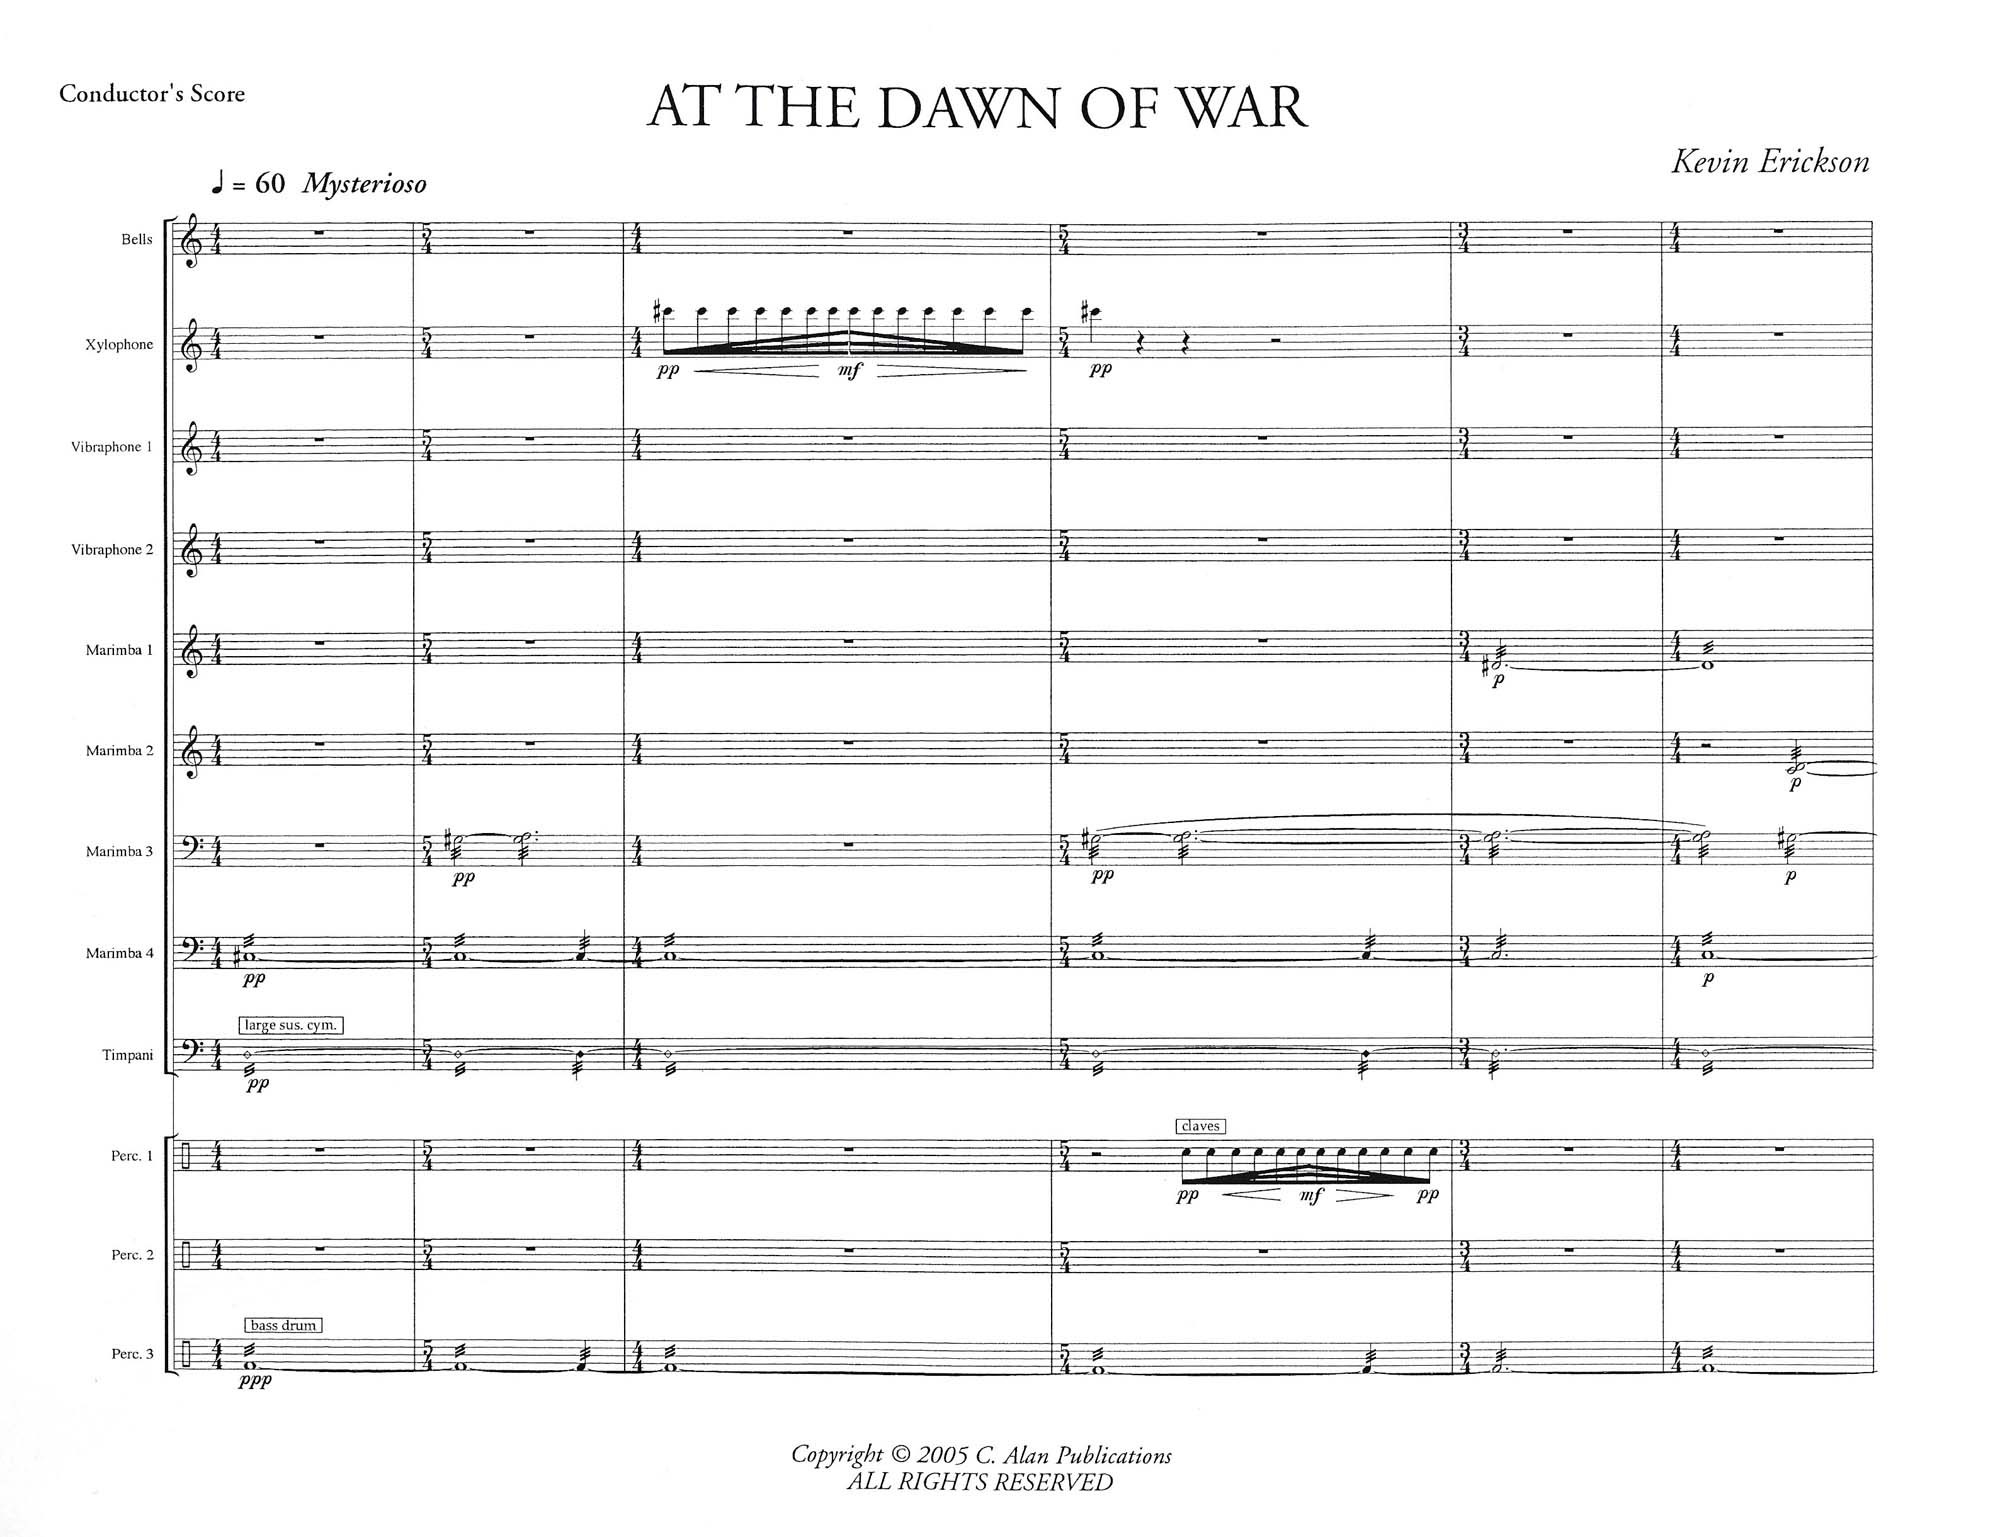 At The Dawn Of War by Kevin Erickson